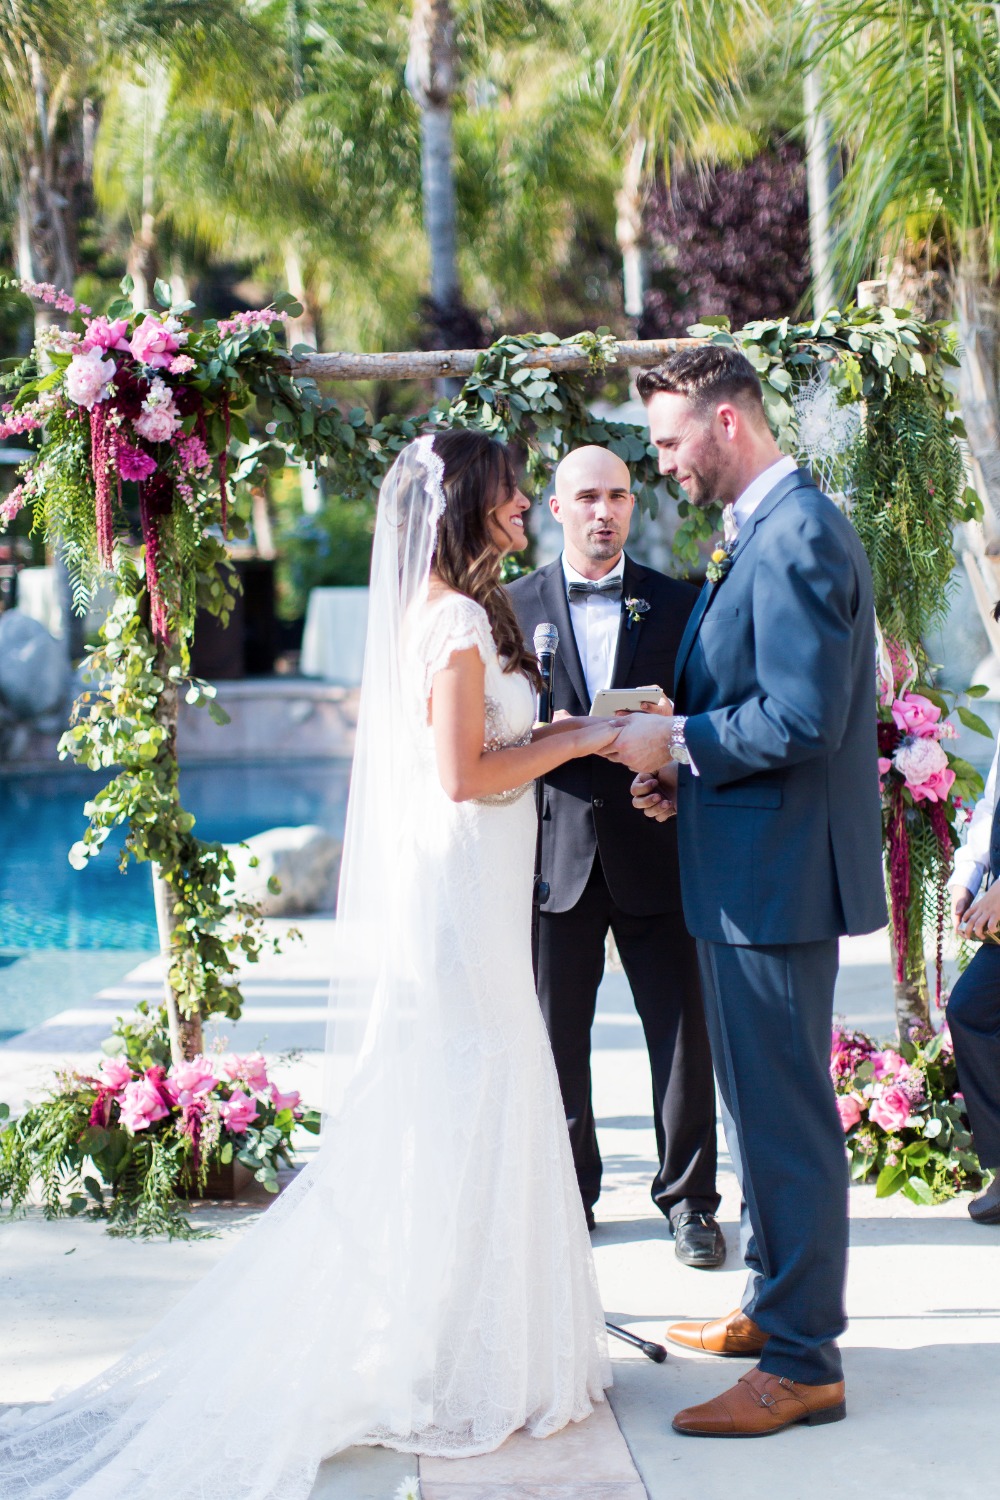 The sweetest outdoor reception